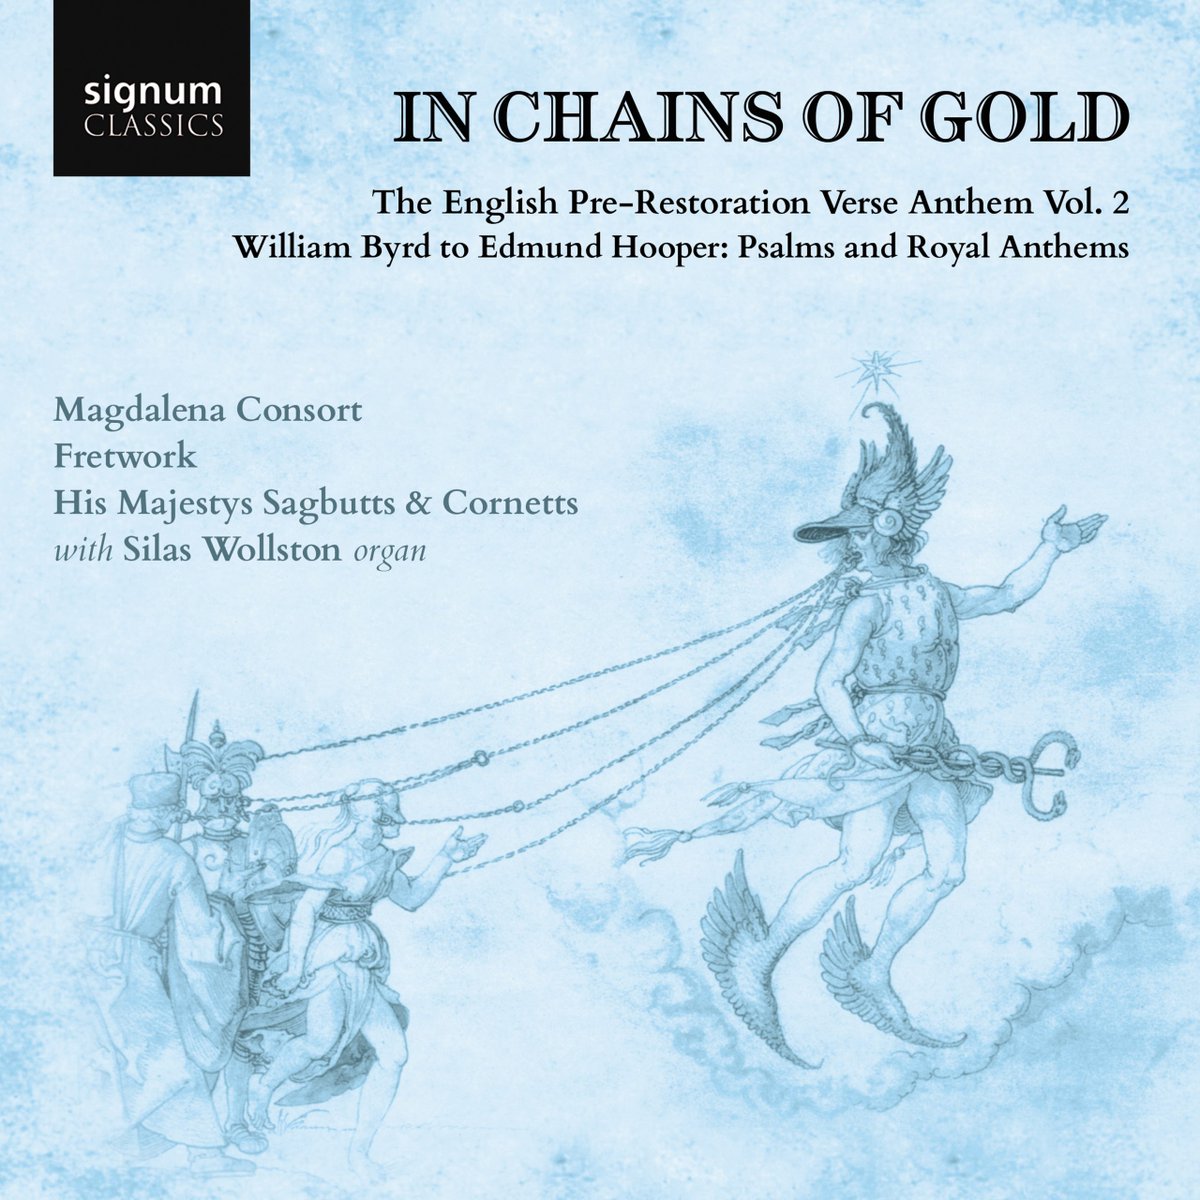 At last! Our new CD 'In Chains of Gold' vol. 2 will be released in just a few weeks. Here is a short video introduction to it. Watch this space over the next weeks for links to some Apple Music videos of complete tracks. @FretworkViols @hismajsagbutts youtu.be/4tgp9CHGLog